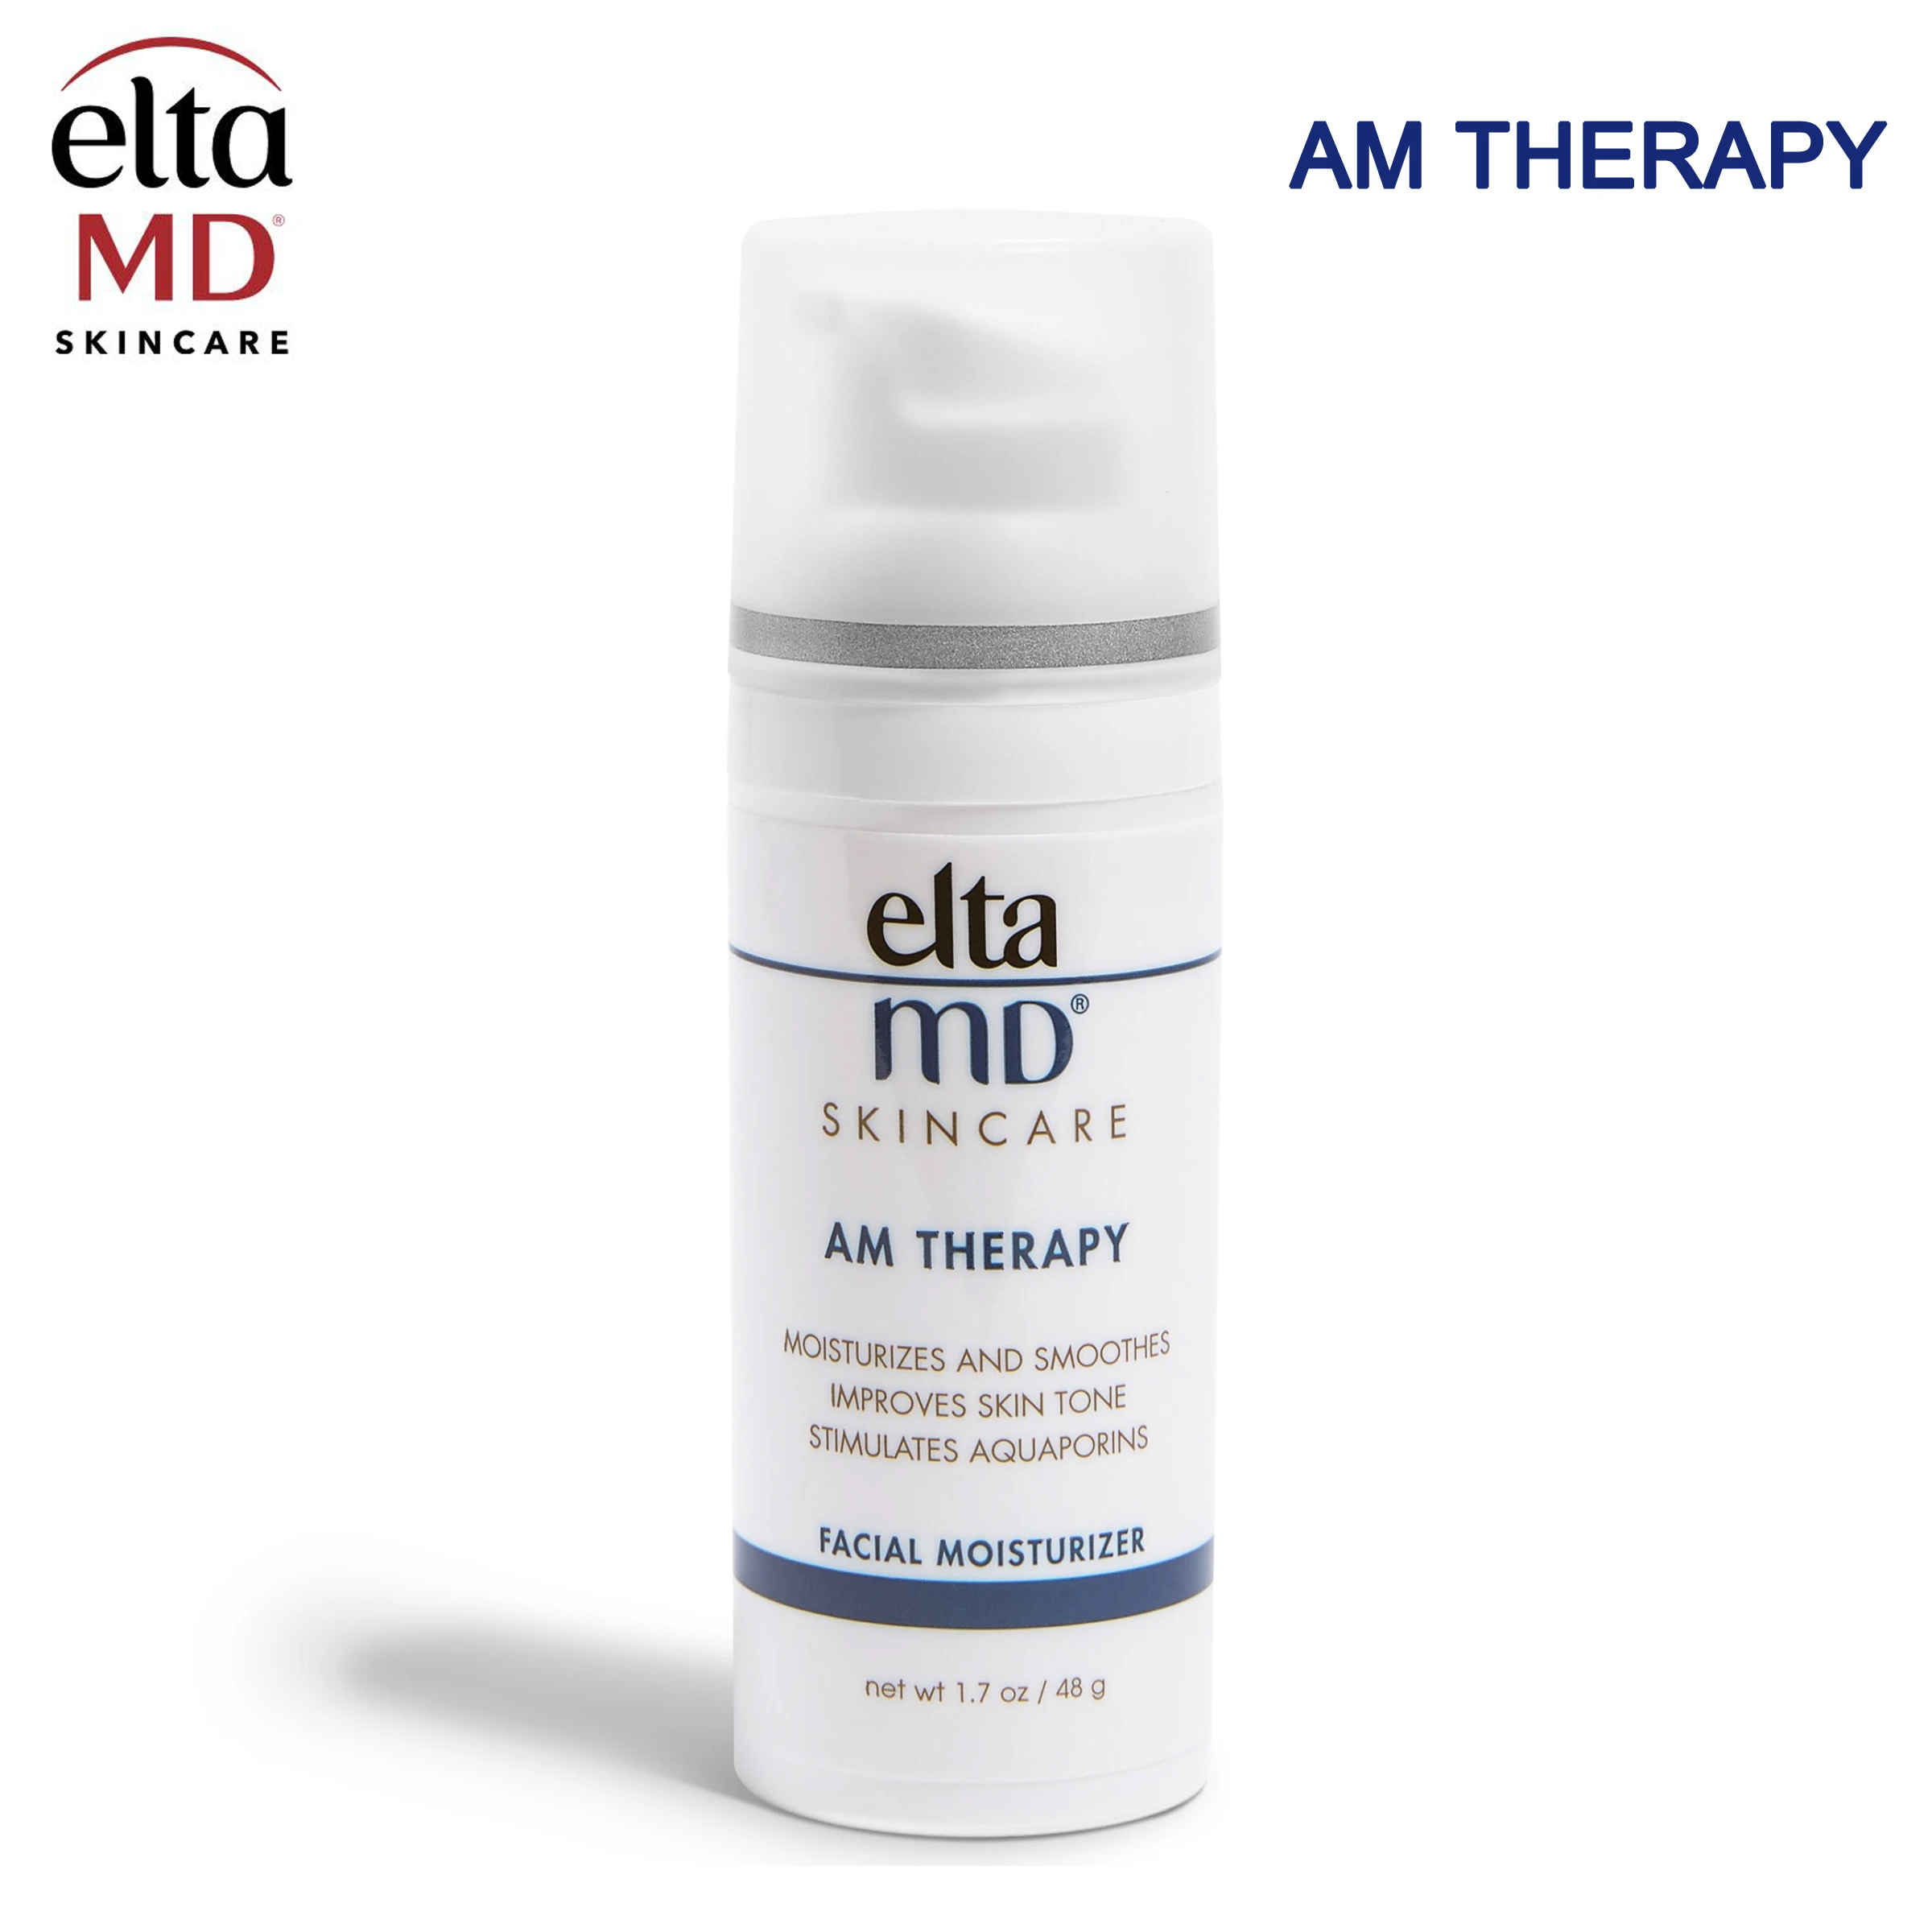 

EltaMD AM Therapy Facial Moisturizer PM For Moisturizes and smoothes skin Brightens and improves skin Safe for all skin types